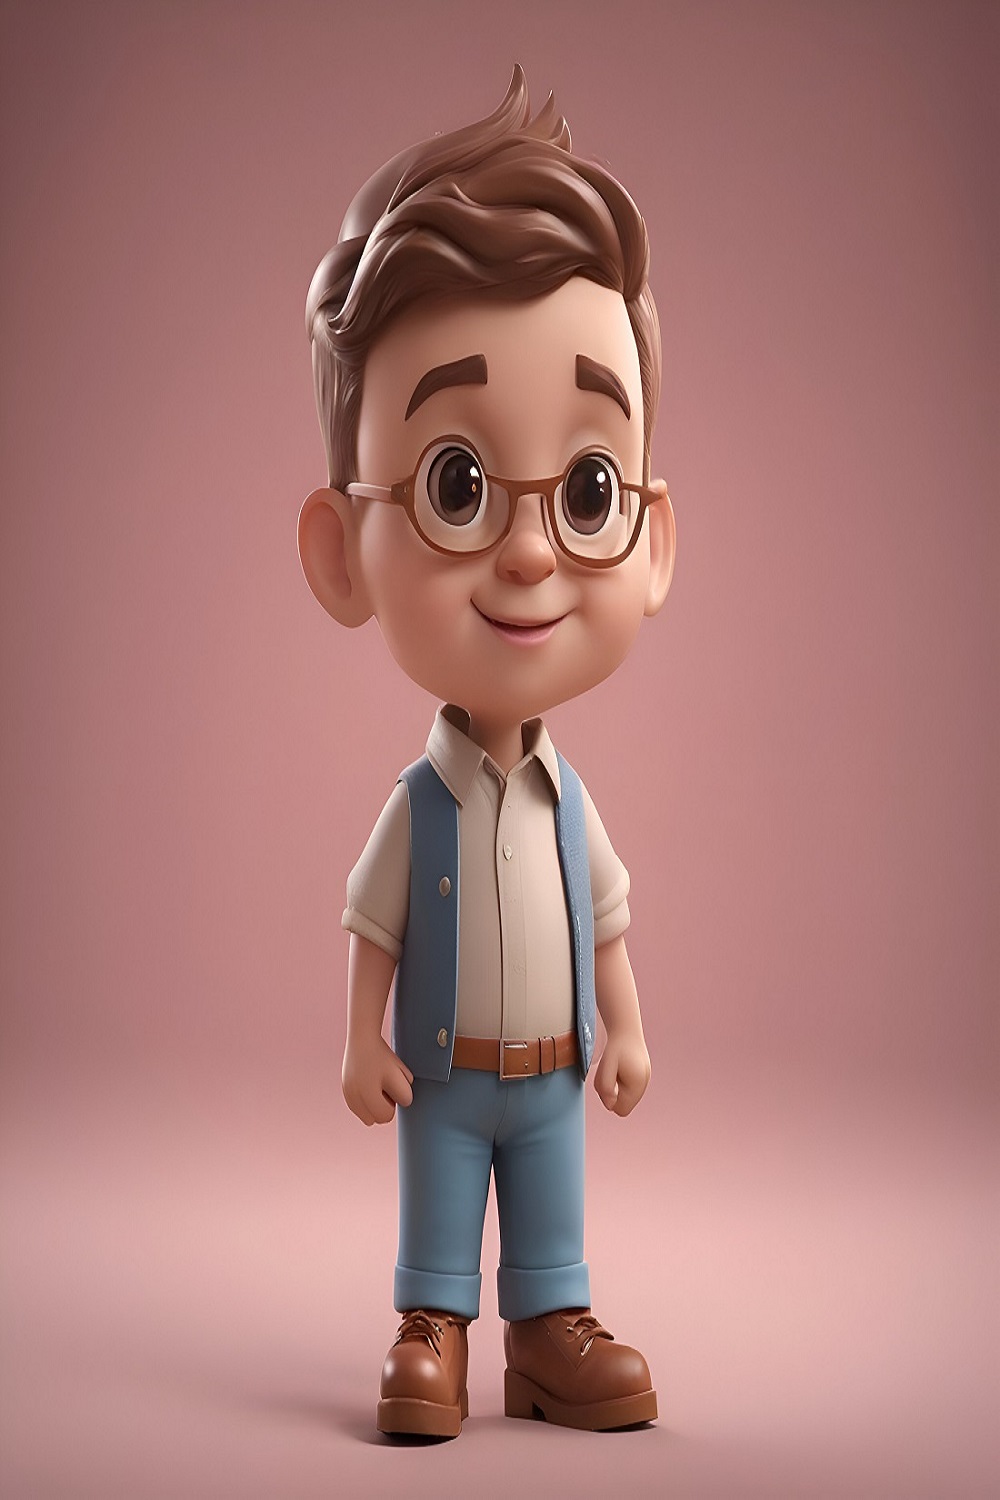 3d illustration cute cartoon boy with glasses pinterest preview image.